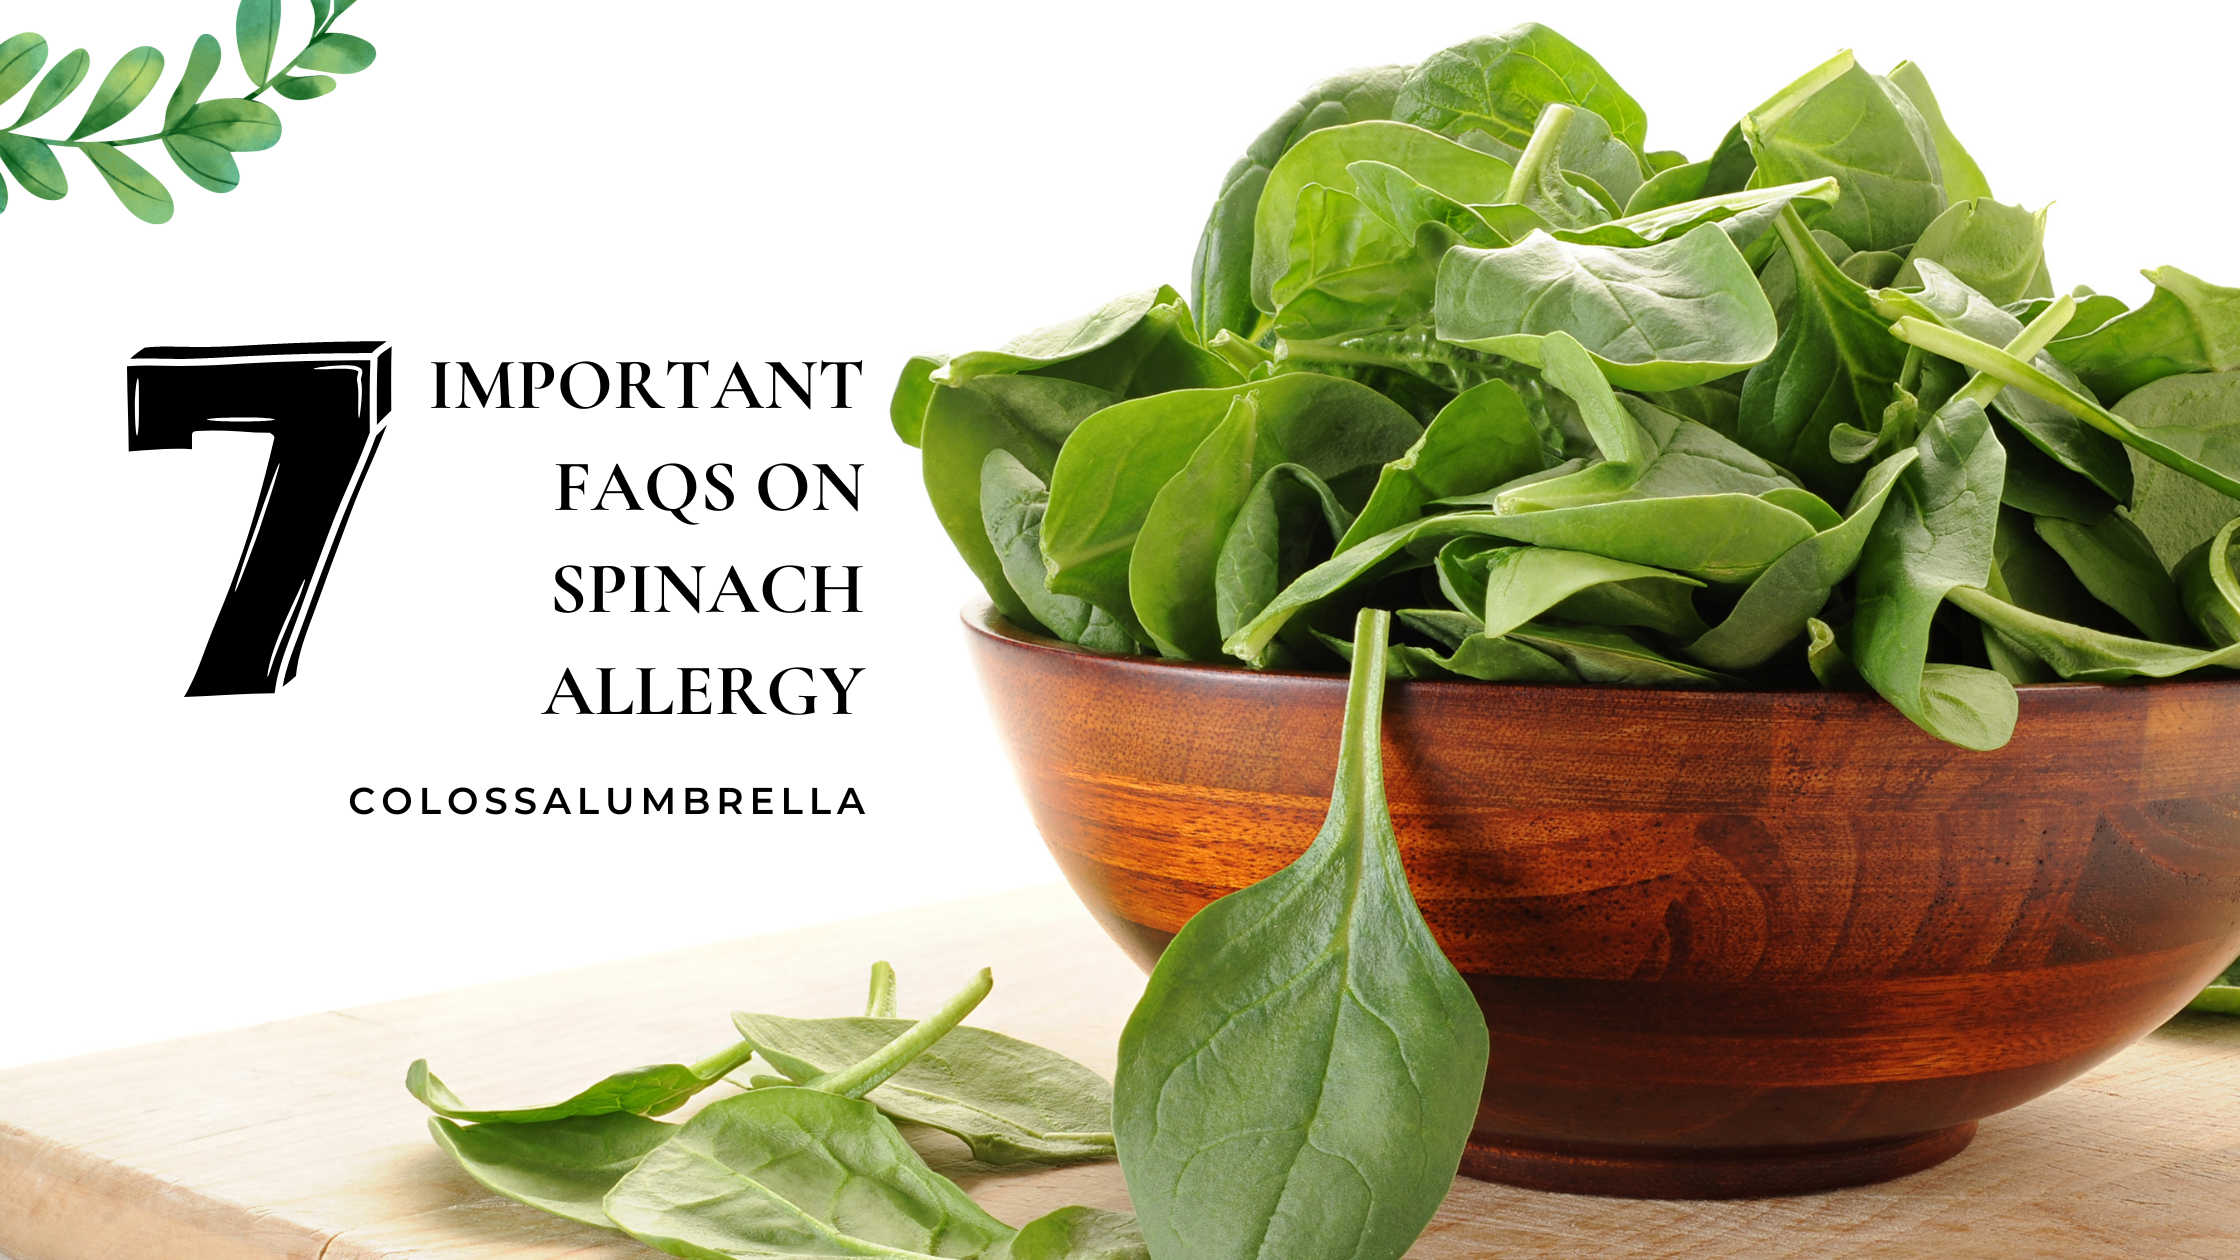 What to do if you’re allergic to spinach? 7 important FAQs on spinach allergy